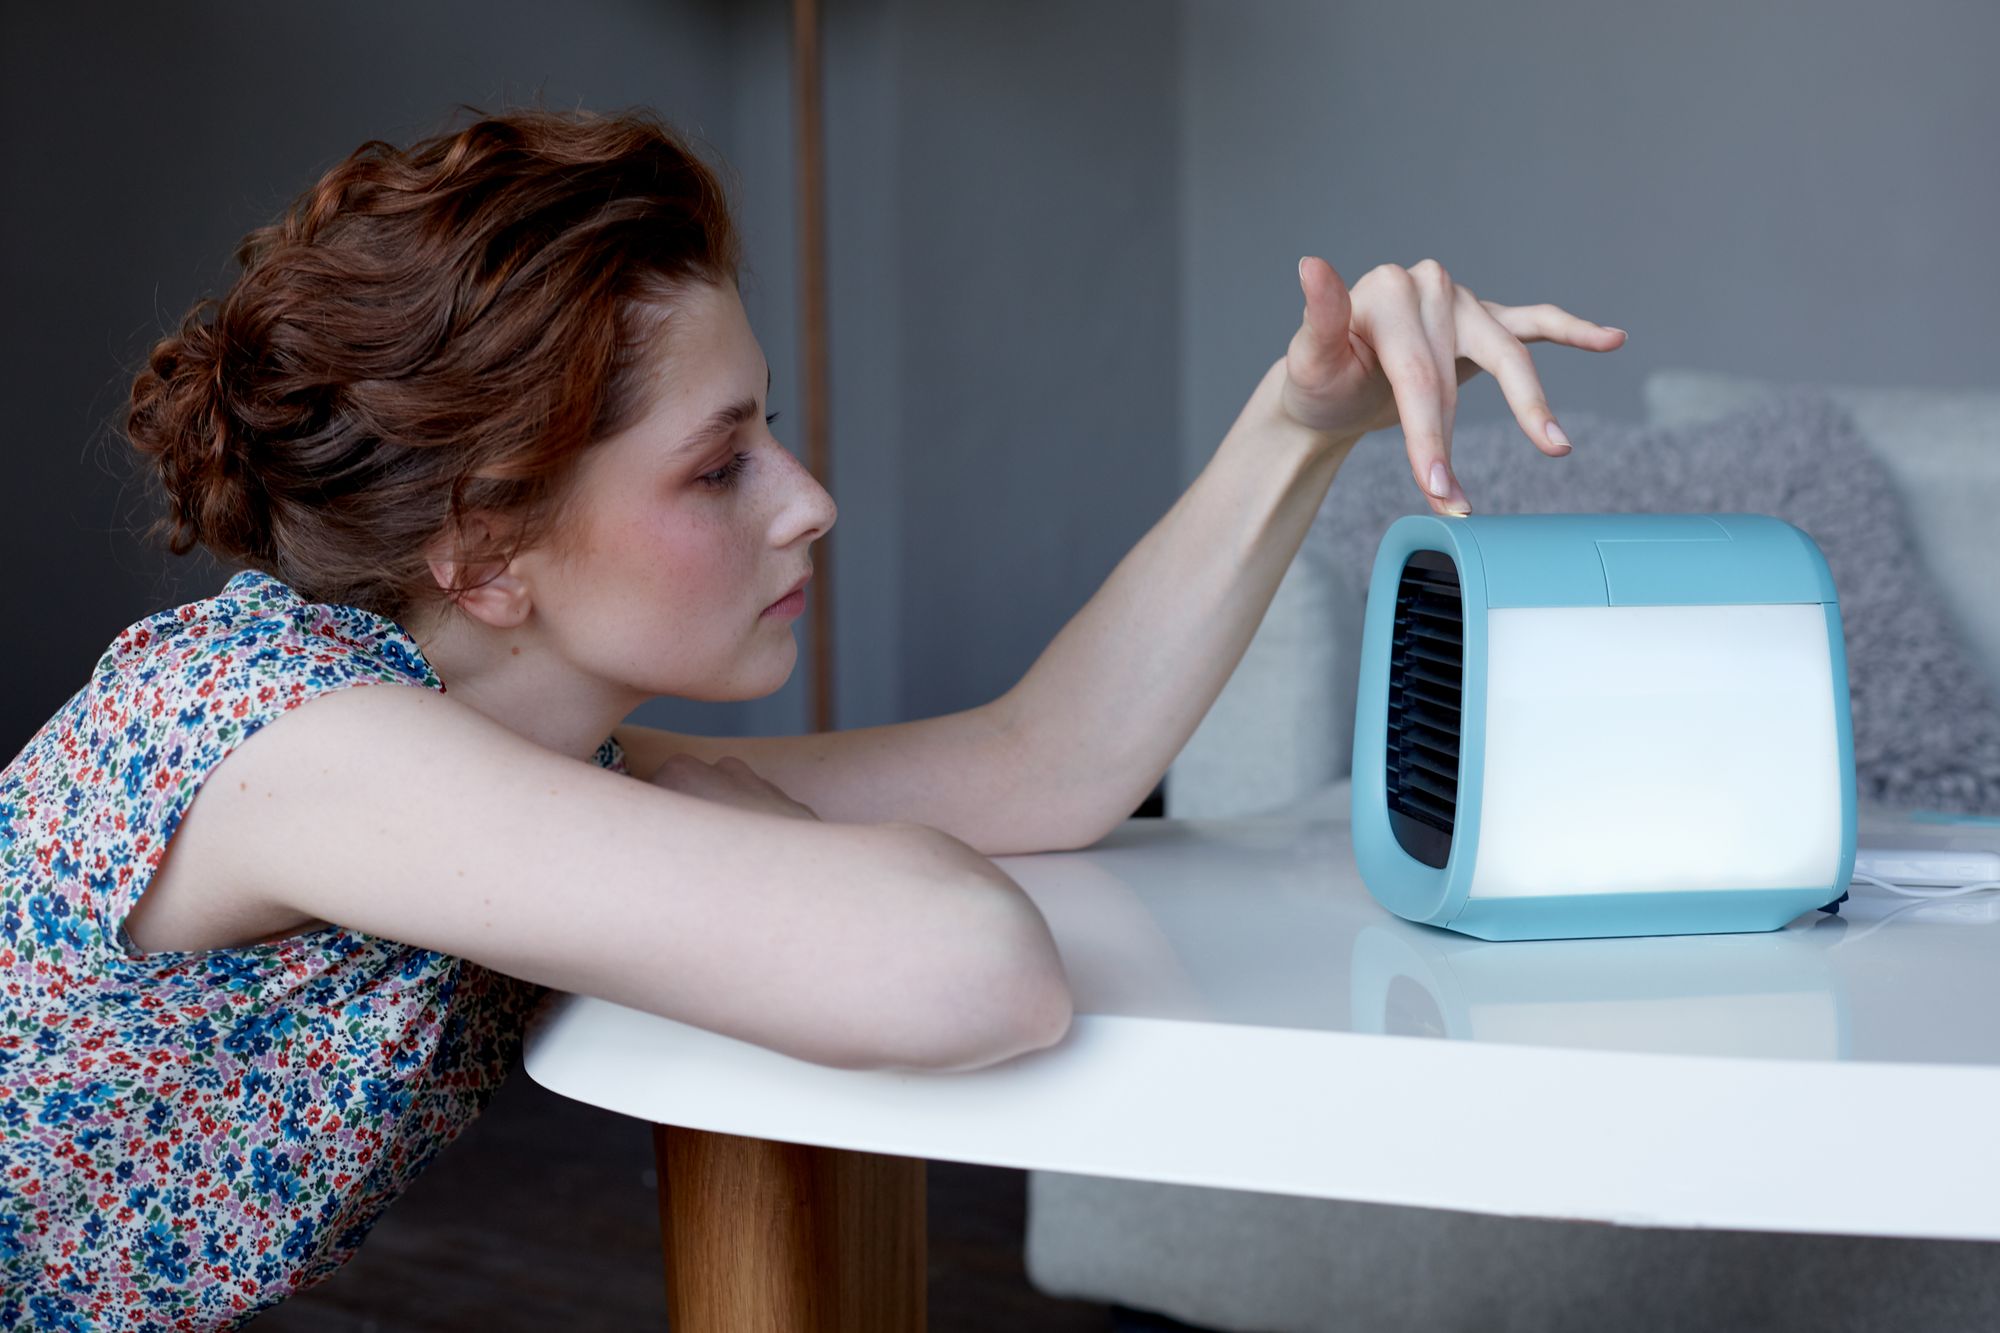 The Guide for Choosing the Best Personal Air Conditioner